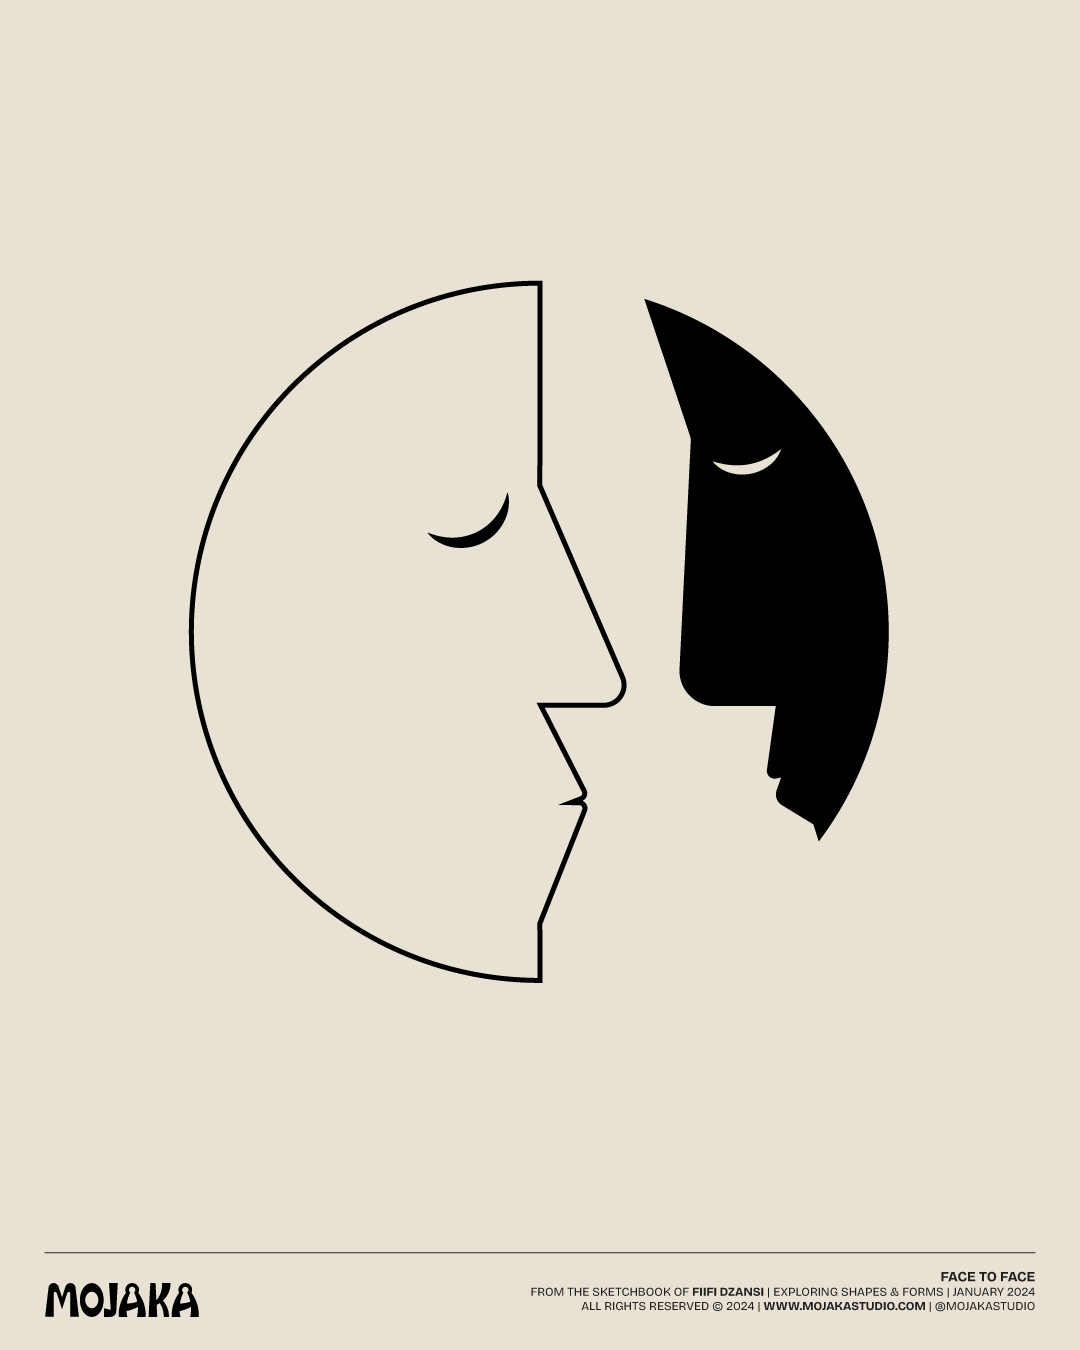 Two faces in the moon looking each other in the eye